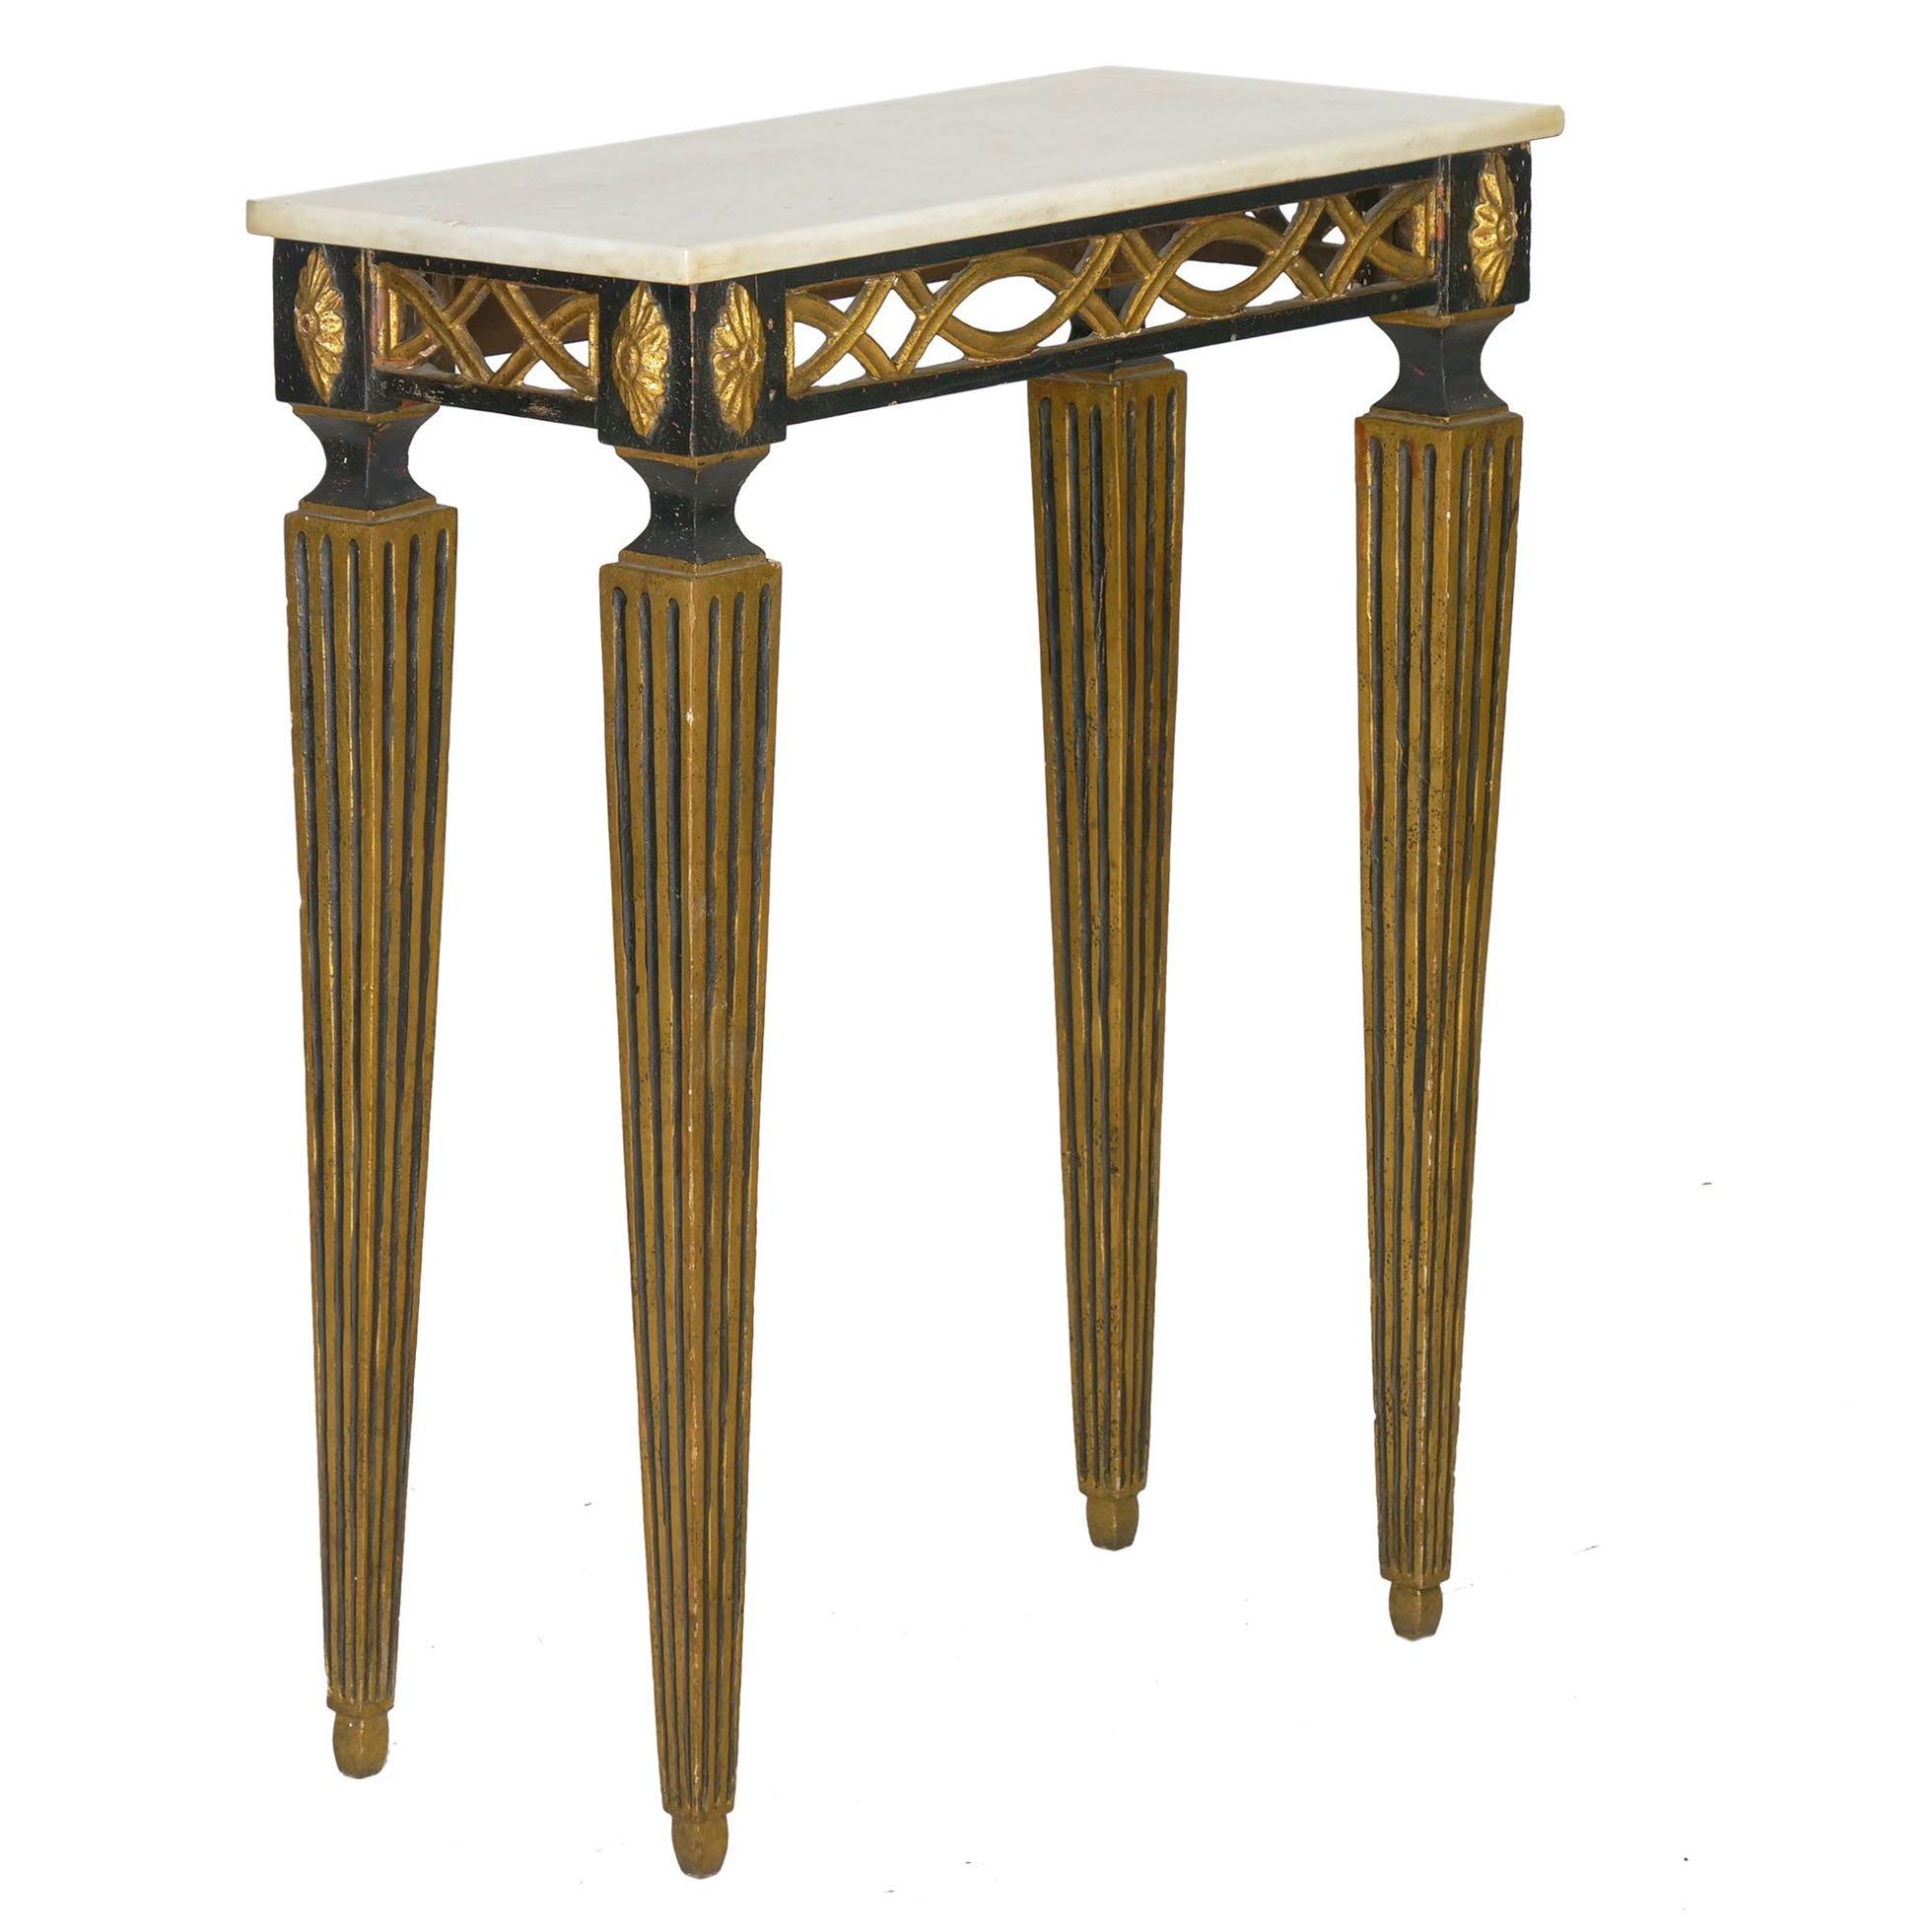 A petite console table with bold design, there is a strength in the presence of oversized legs that offsets the delicate nature of the pierced apron. The effect is quite striking and typical of the Italian taste for the vigorous and whimsical in